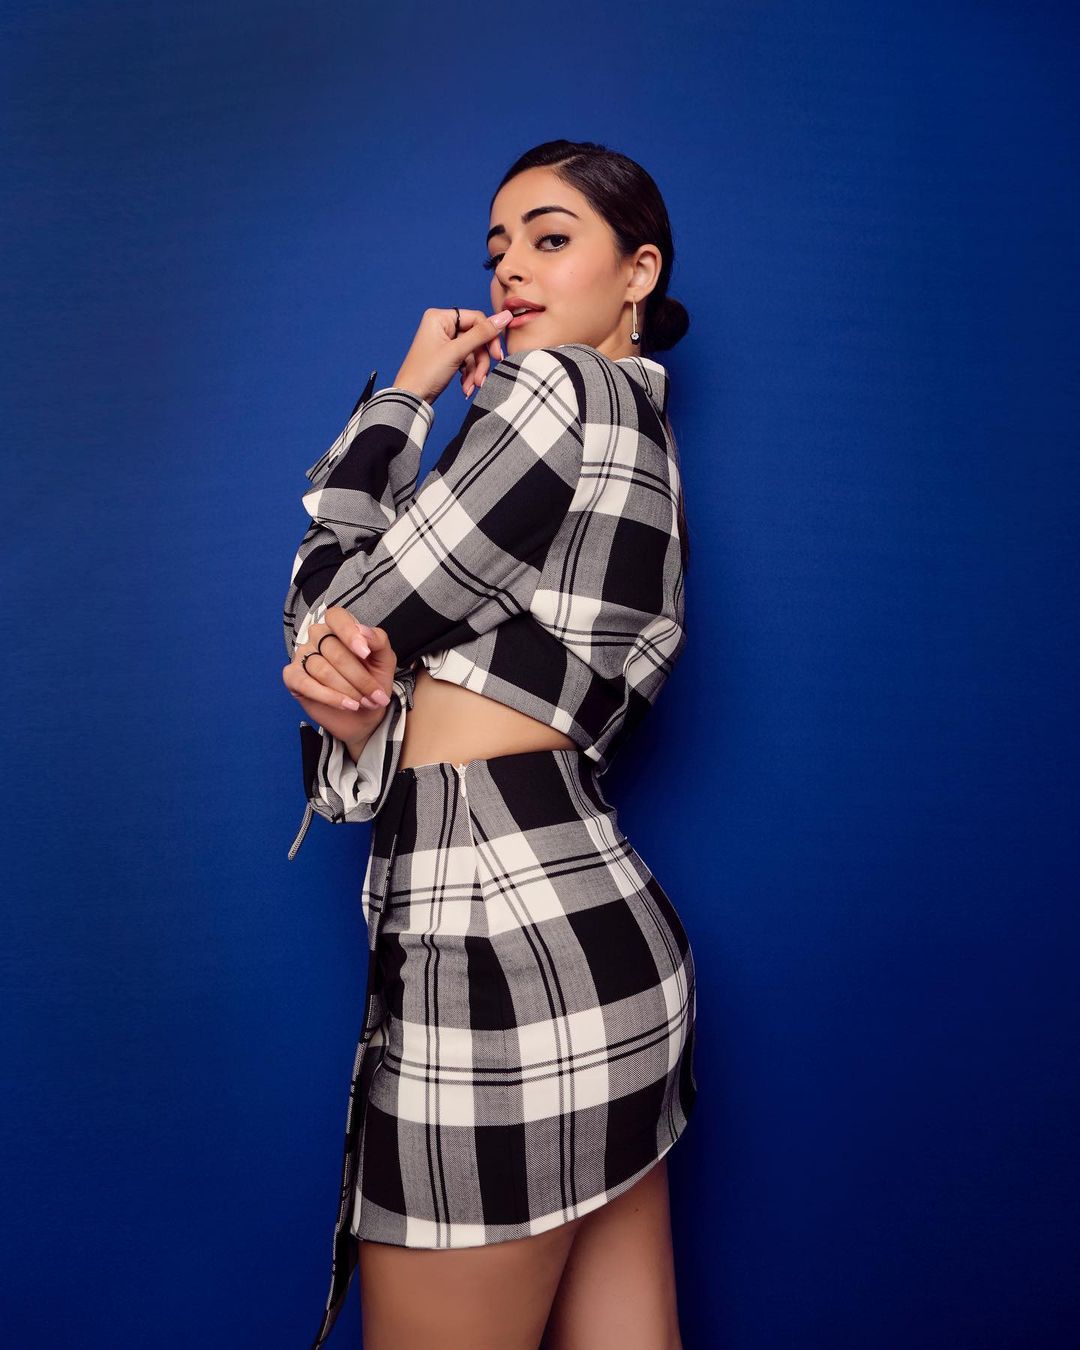 Ananya Pandey In A Black And White Checkered Mini Skirt And Coat